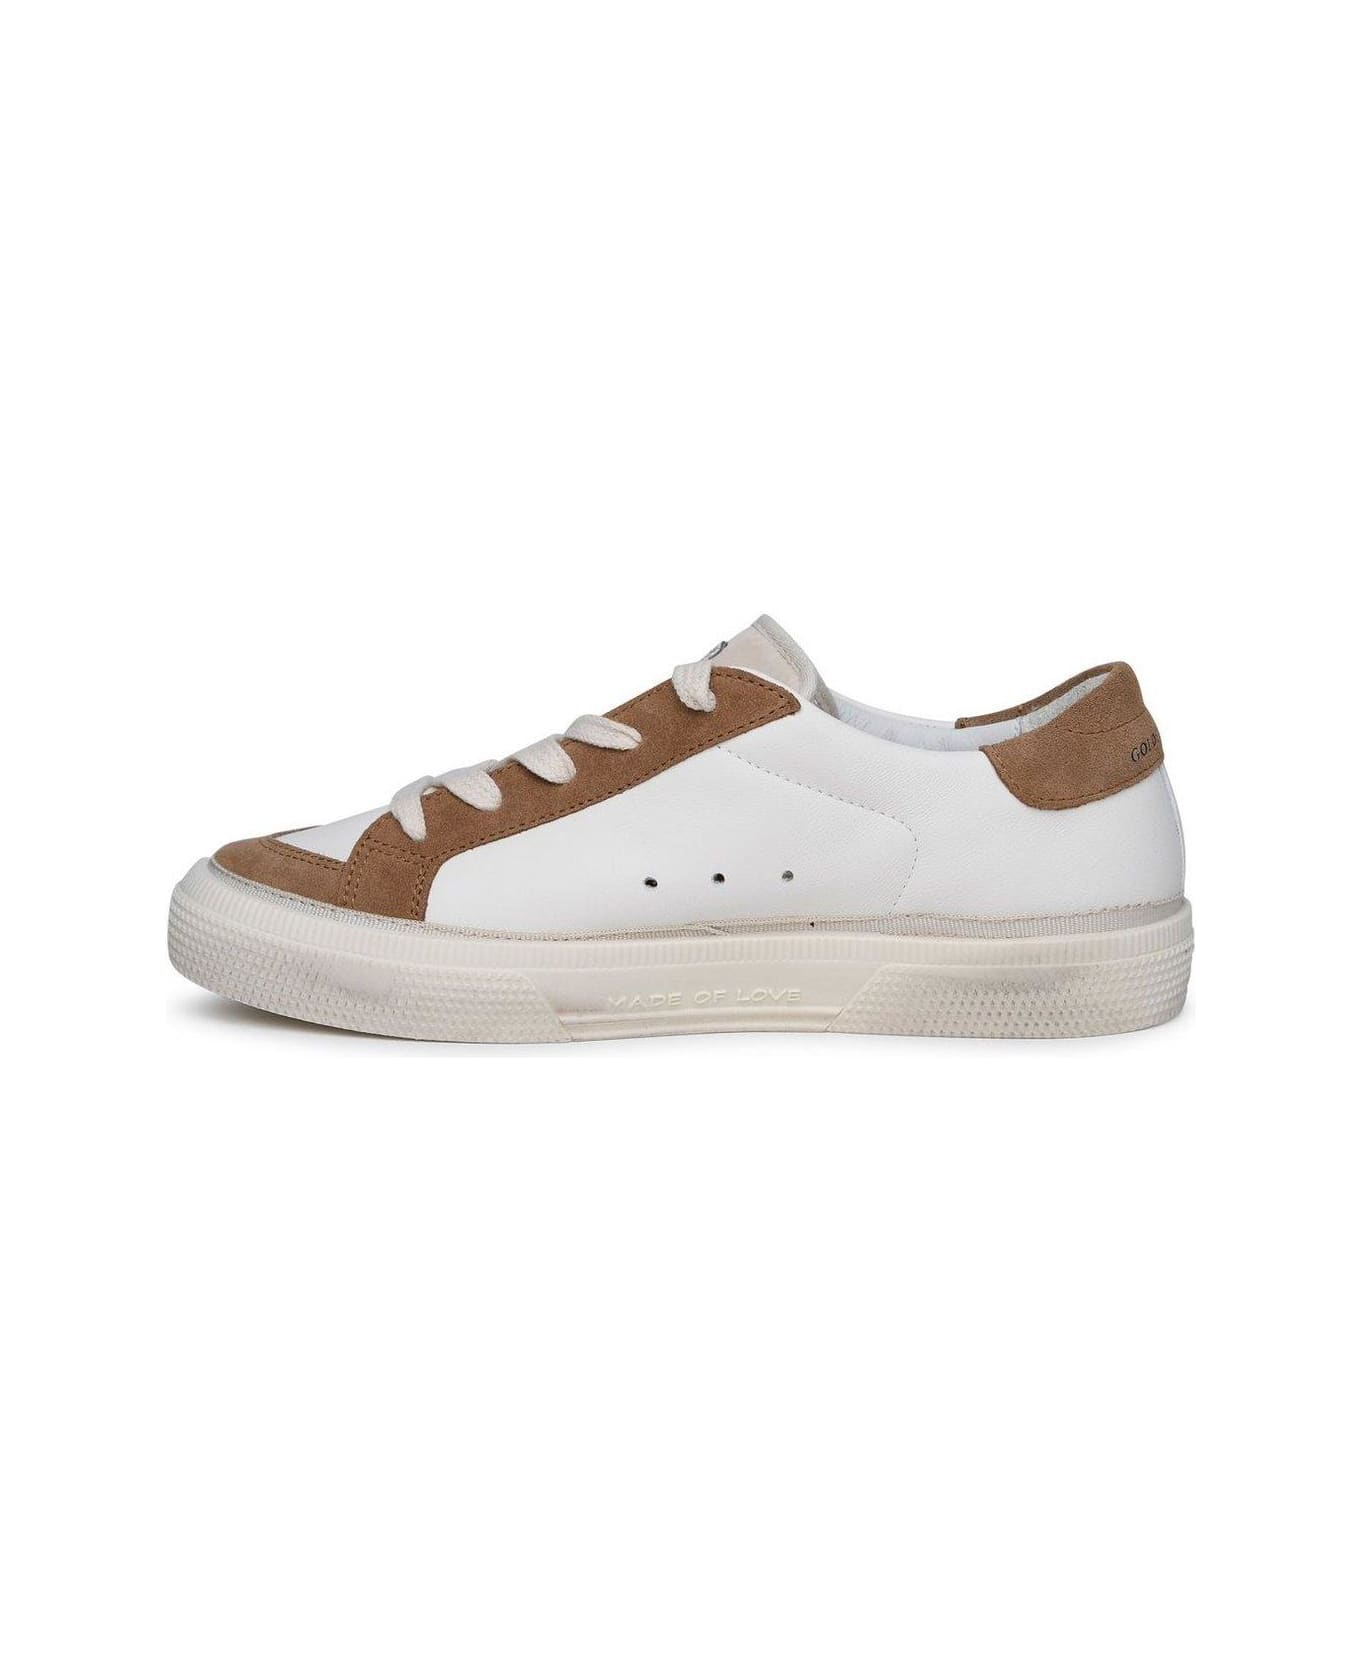 Golden Goose Superstar Lace-up Sneakers - White/Light Brown